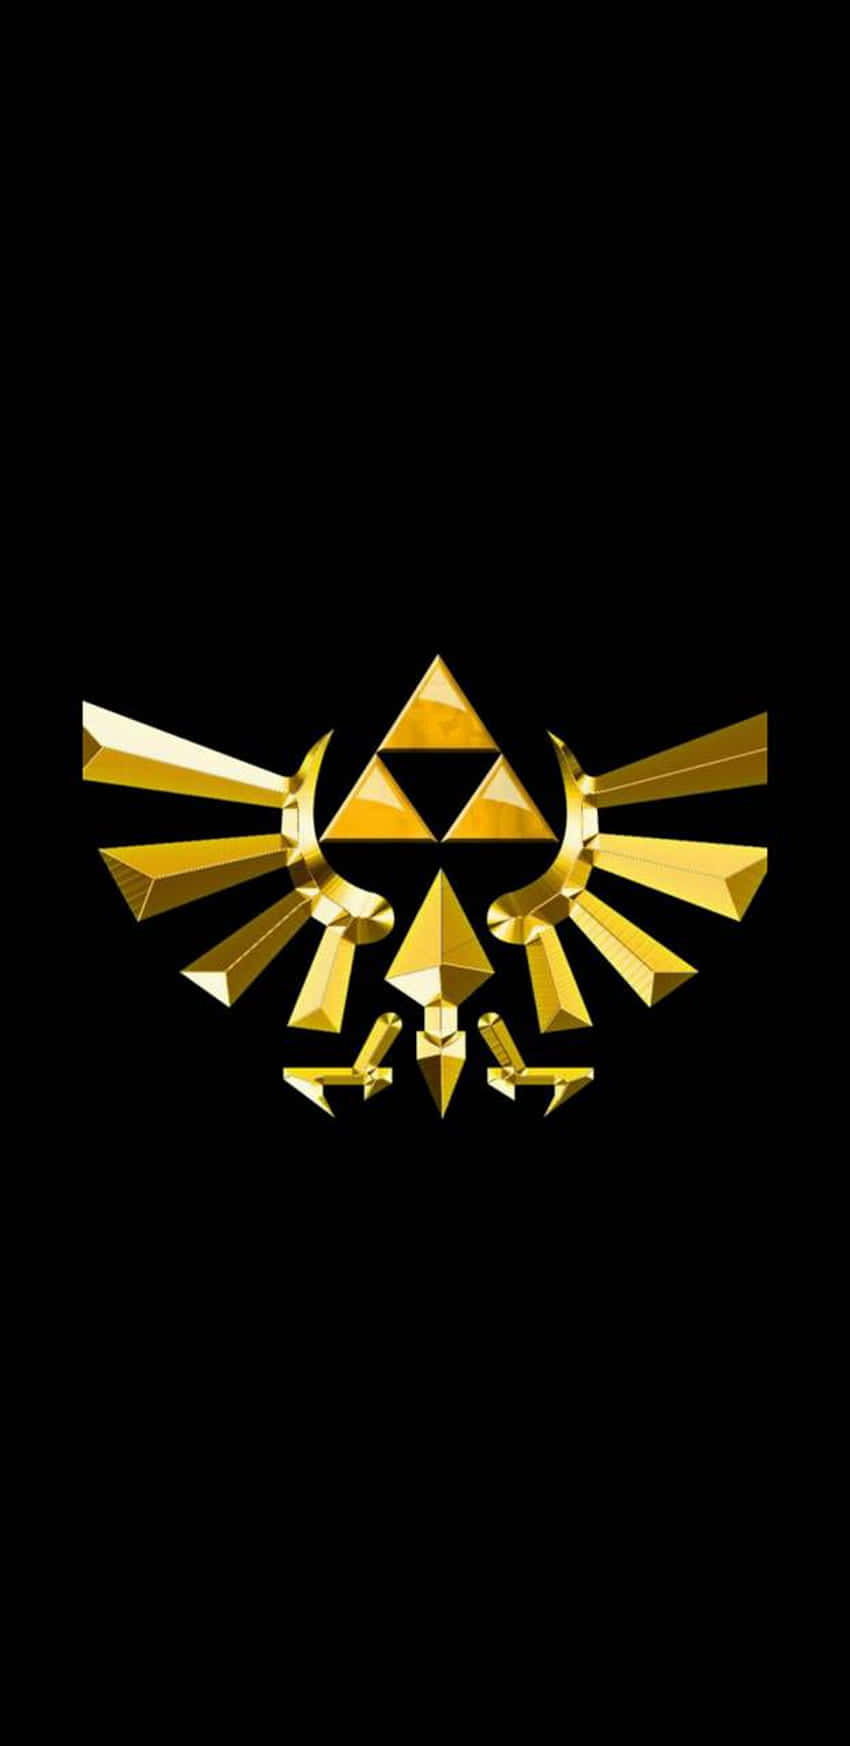 Triforce» 1080P, 2k, 4k HD wallpapers, backgrounds free download | Rare  Gallery